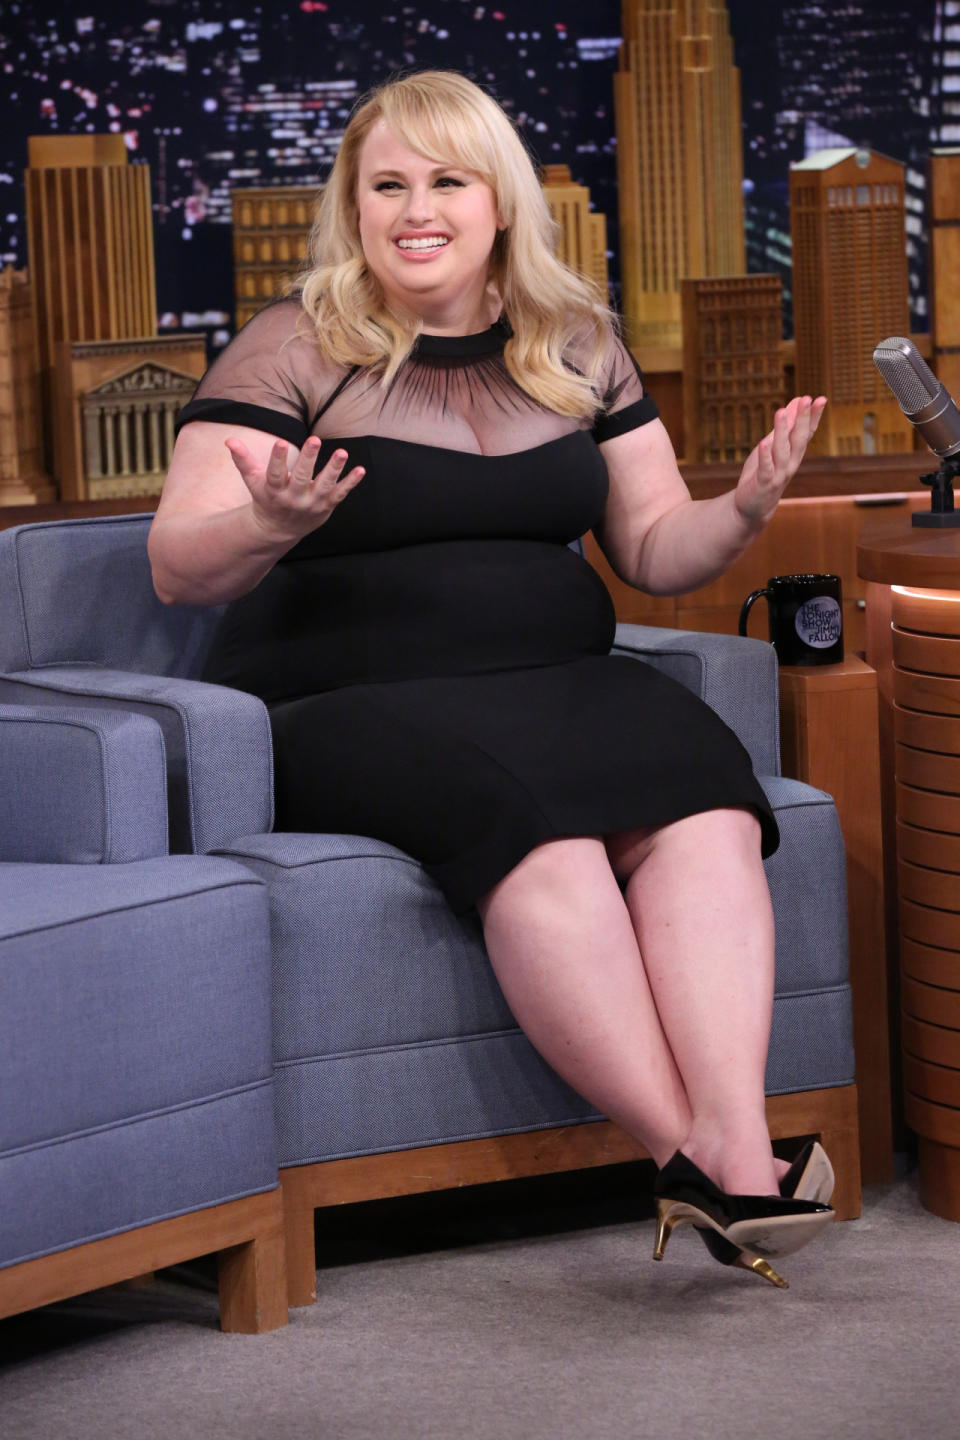 <p>The comedic actress arrived to a taping of “The Tonight Show with Jimmy Fallon” in racy LBD that showed off just the right amount of skin.<br><br></p>